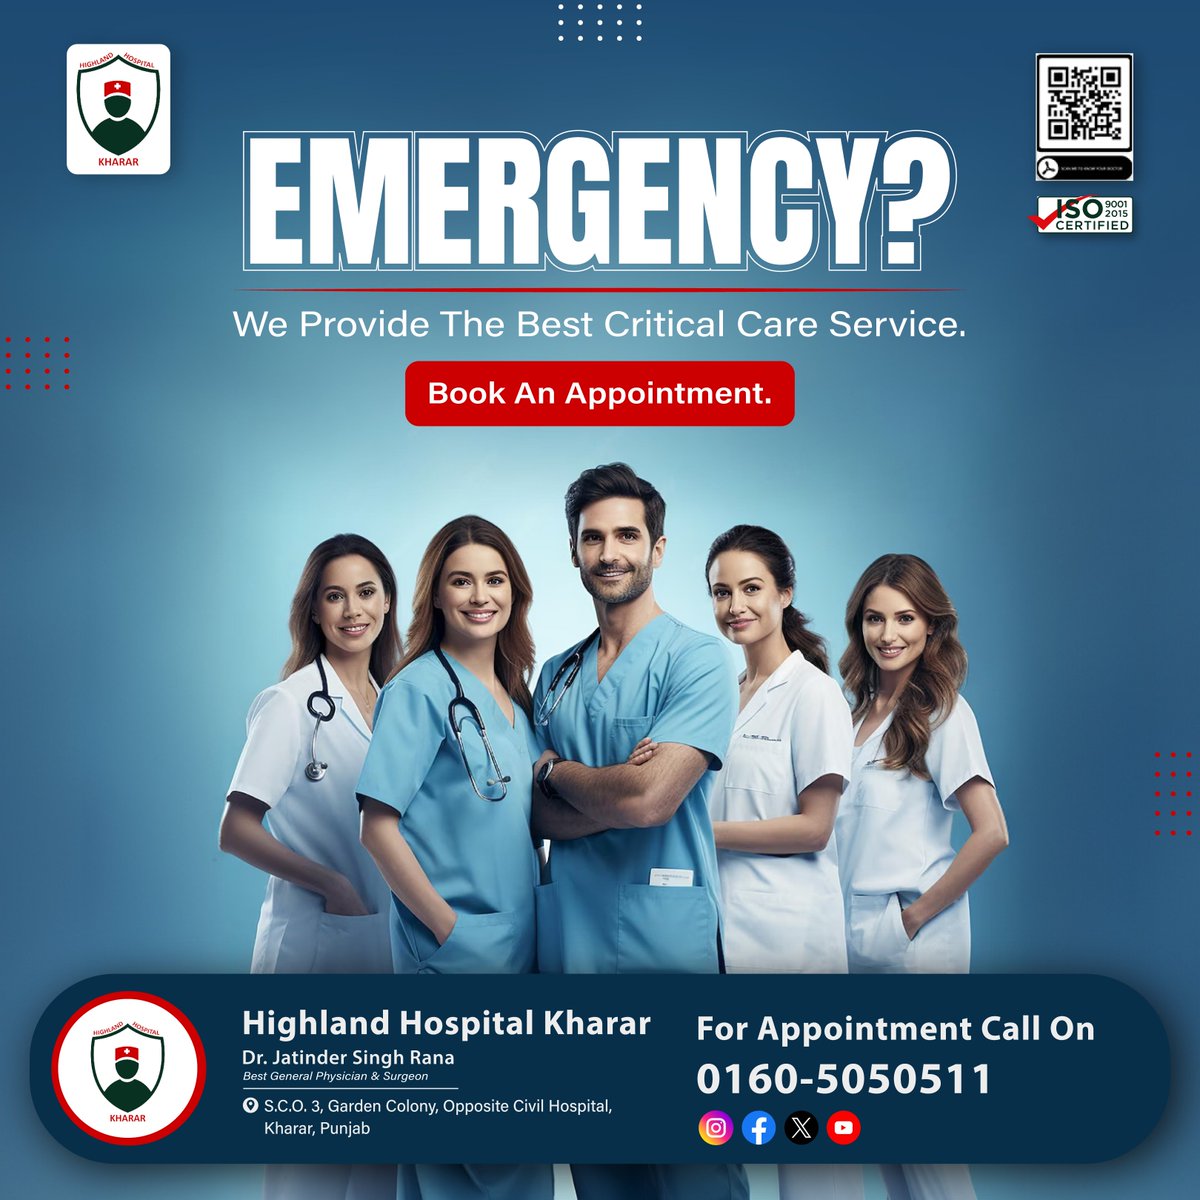 Life doesn't follow office hours, and neither do #emergencies. Whether it's 3 AM or high noon, #HighlandHospitalKharar stands ready!
.
#HealthcareMagic #NightShiftNurses #Emergency #Kharar #Mohali #DrJatinderSingh #Besthospital #explorepage #MidnightMedicine #LifeSavers